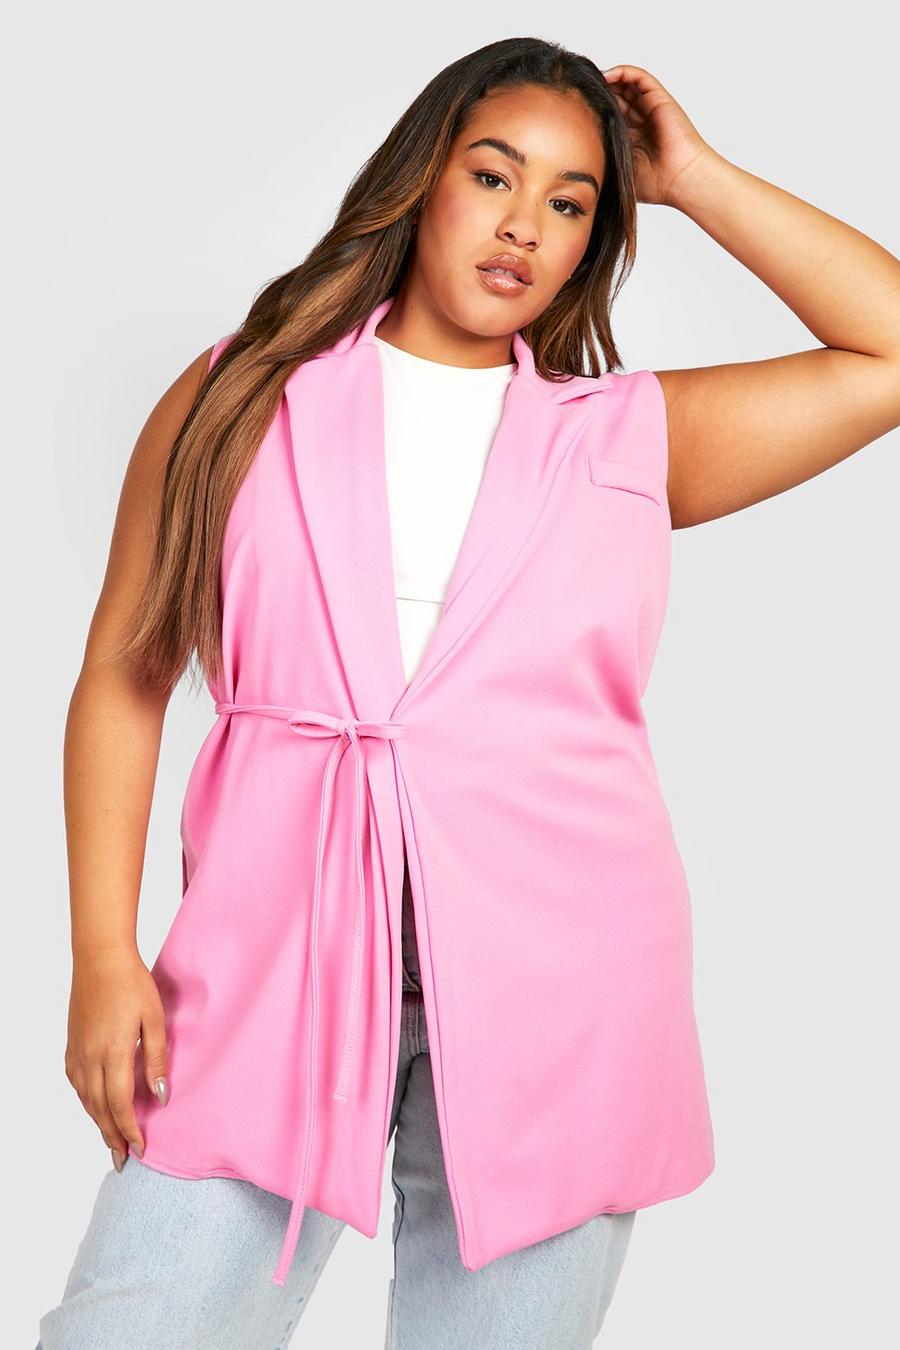 Grande taille - Blazer sans manches, Candy pink image number 1